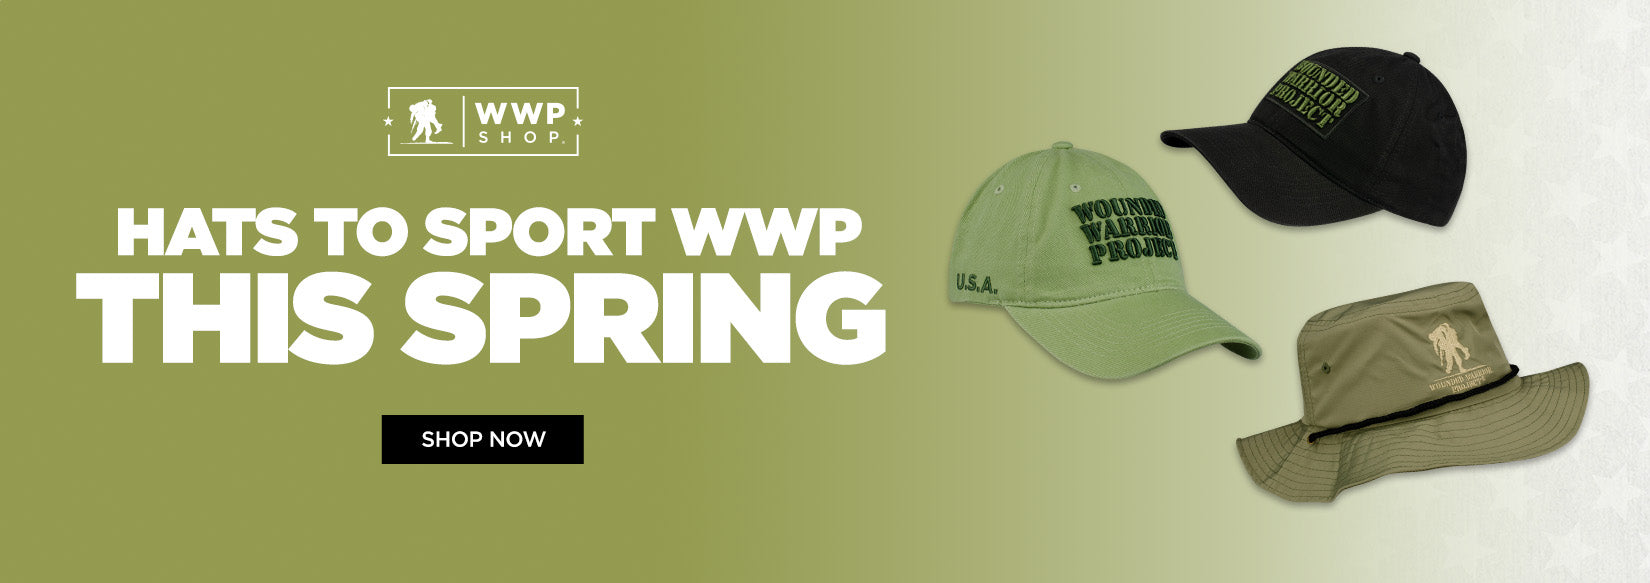 Hats to Sport WWP This Spring - SHOP NOW